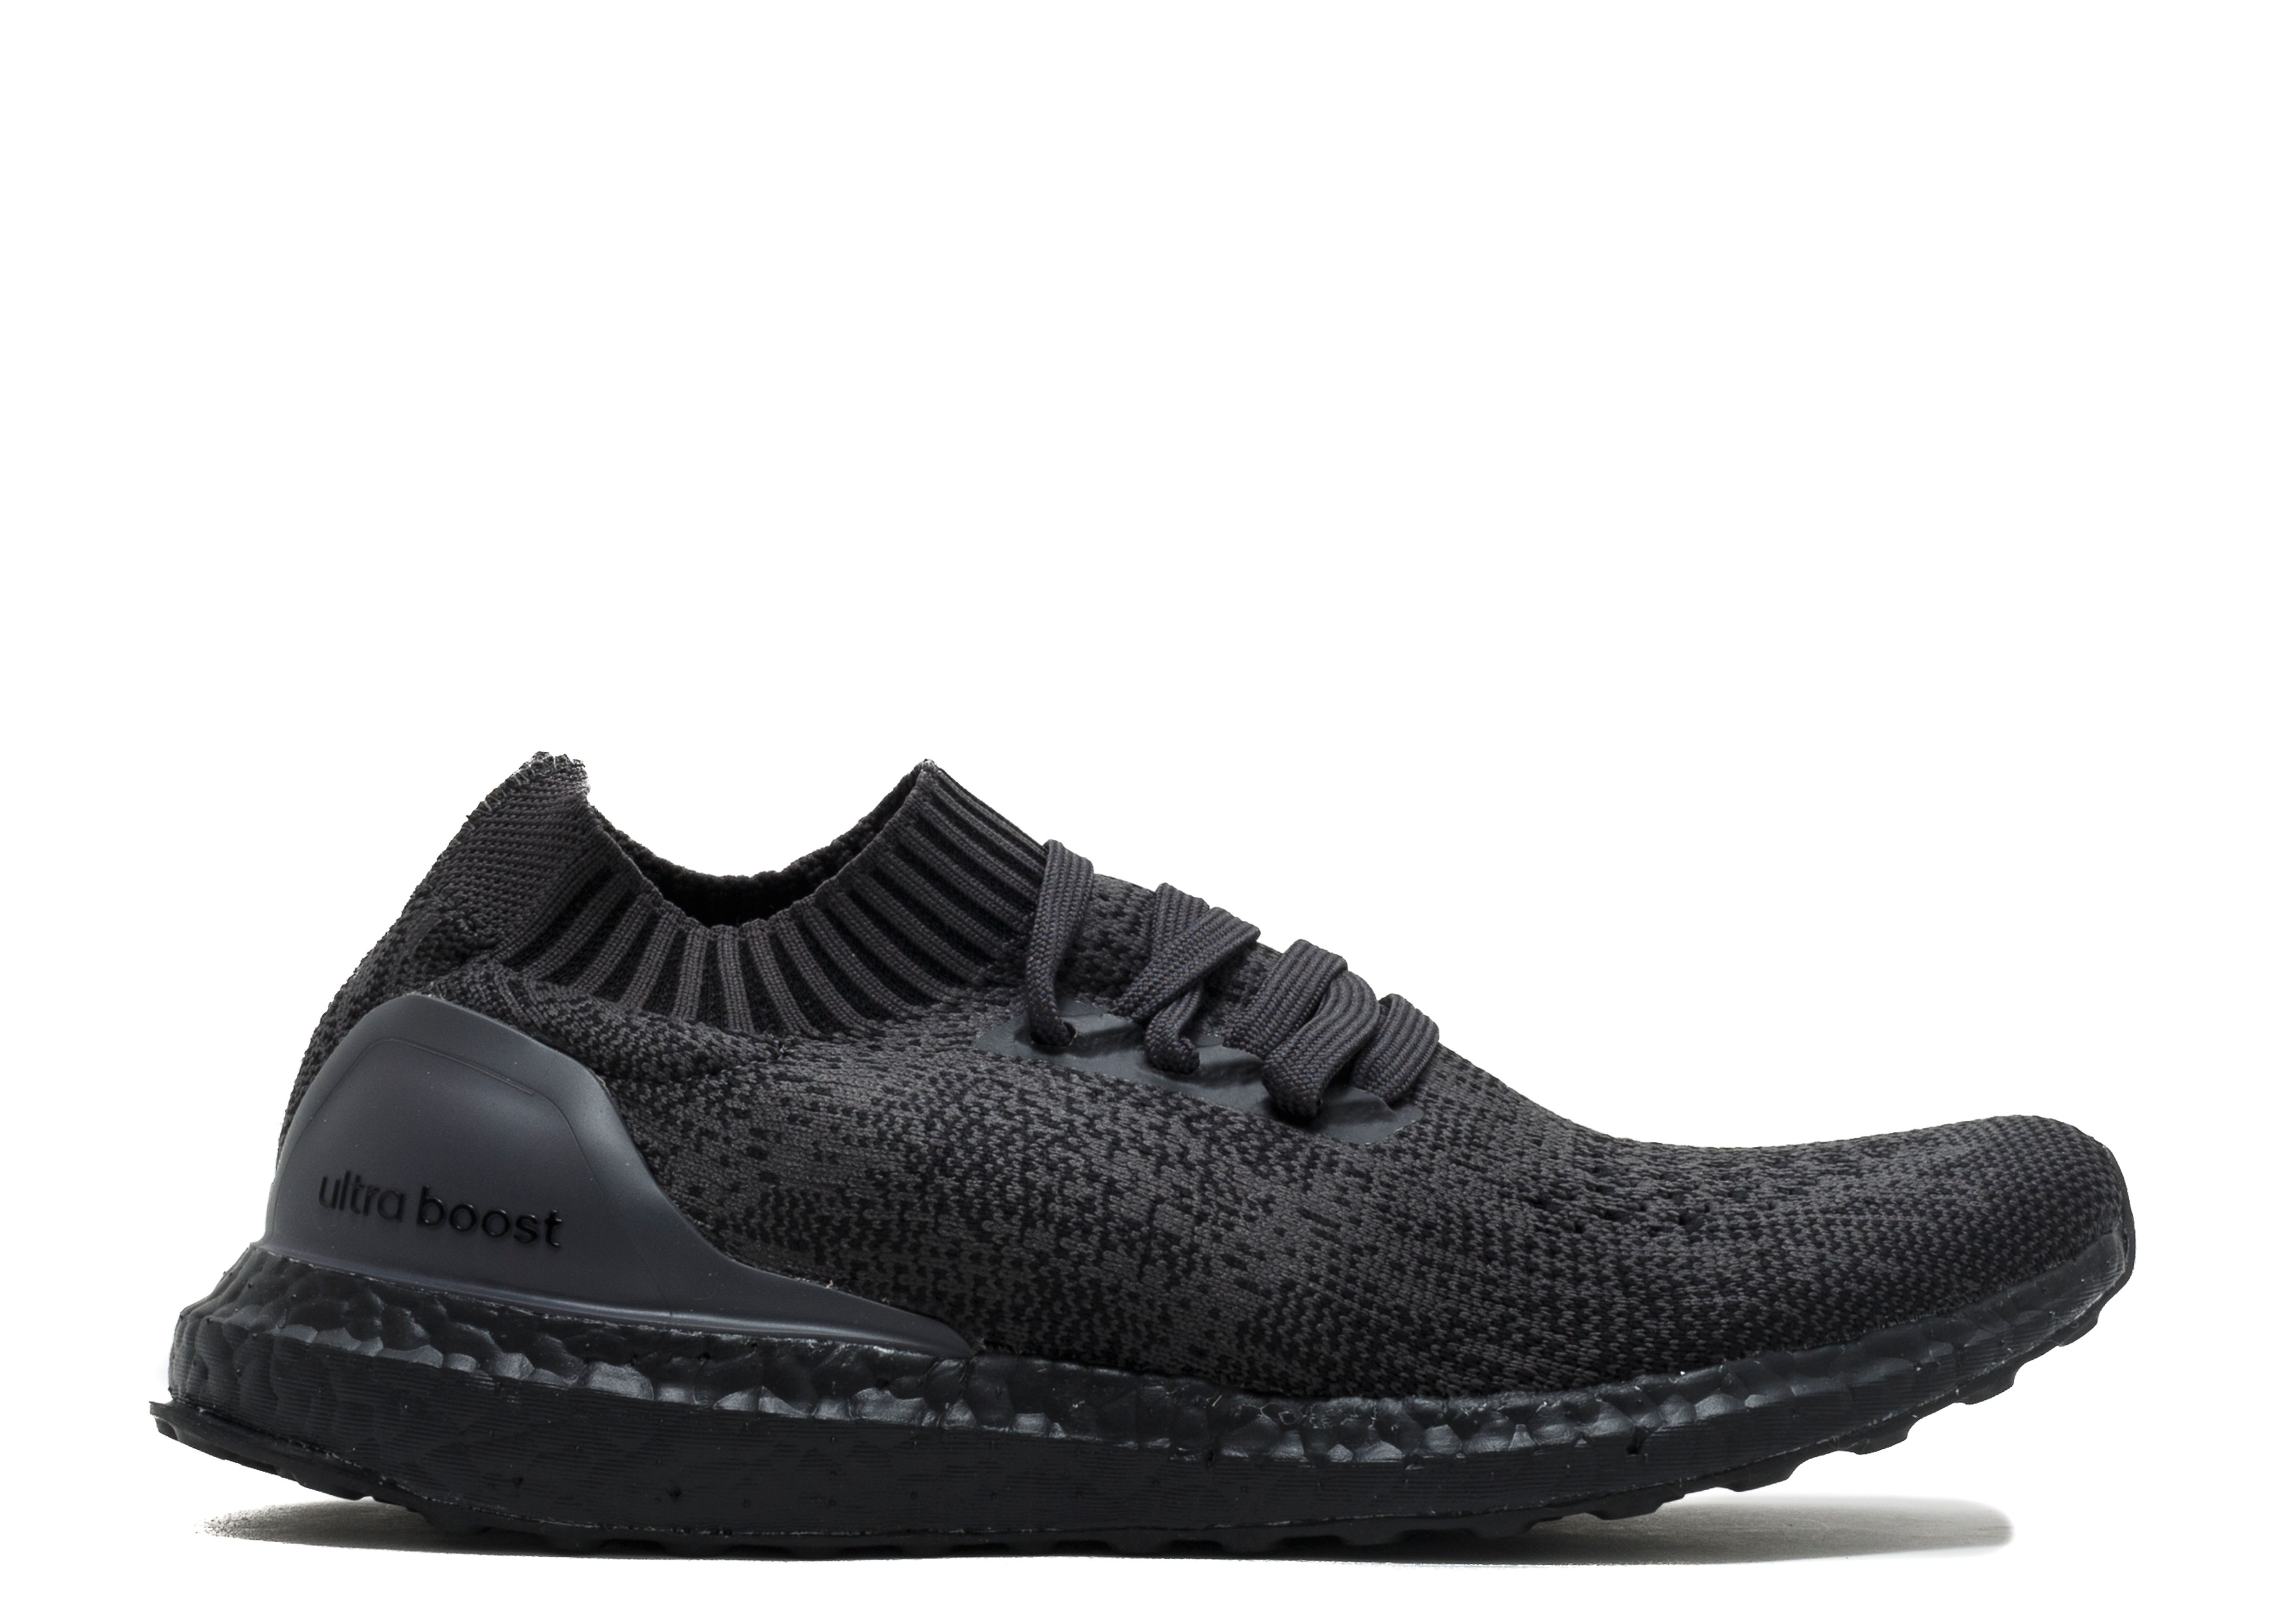 adidas ultra boost uncaged black out